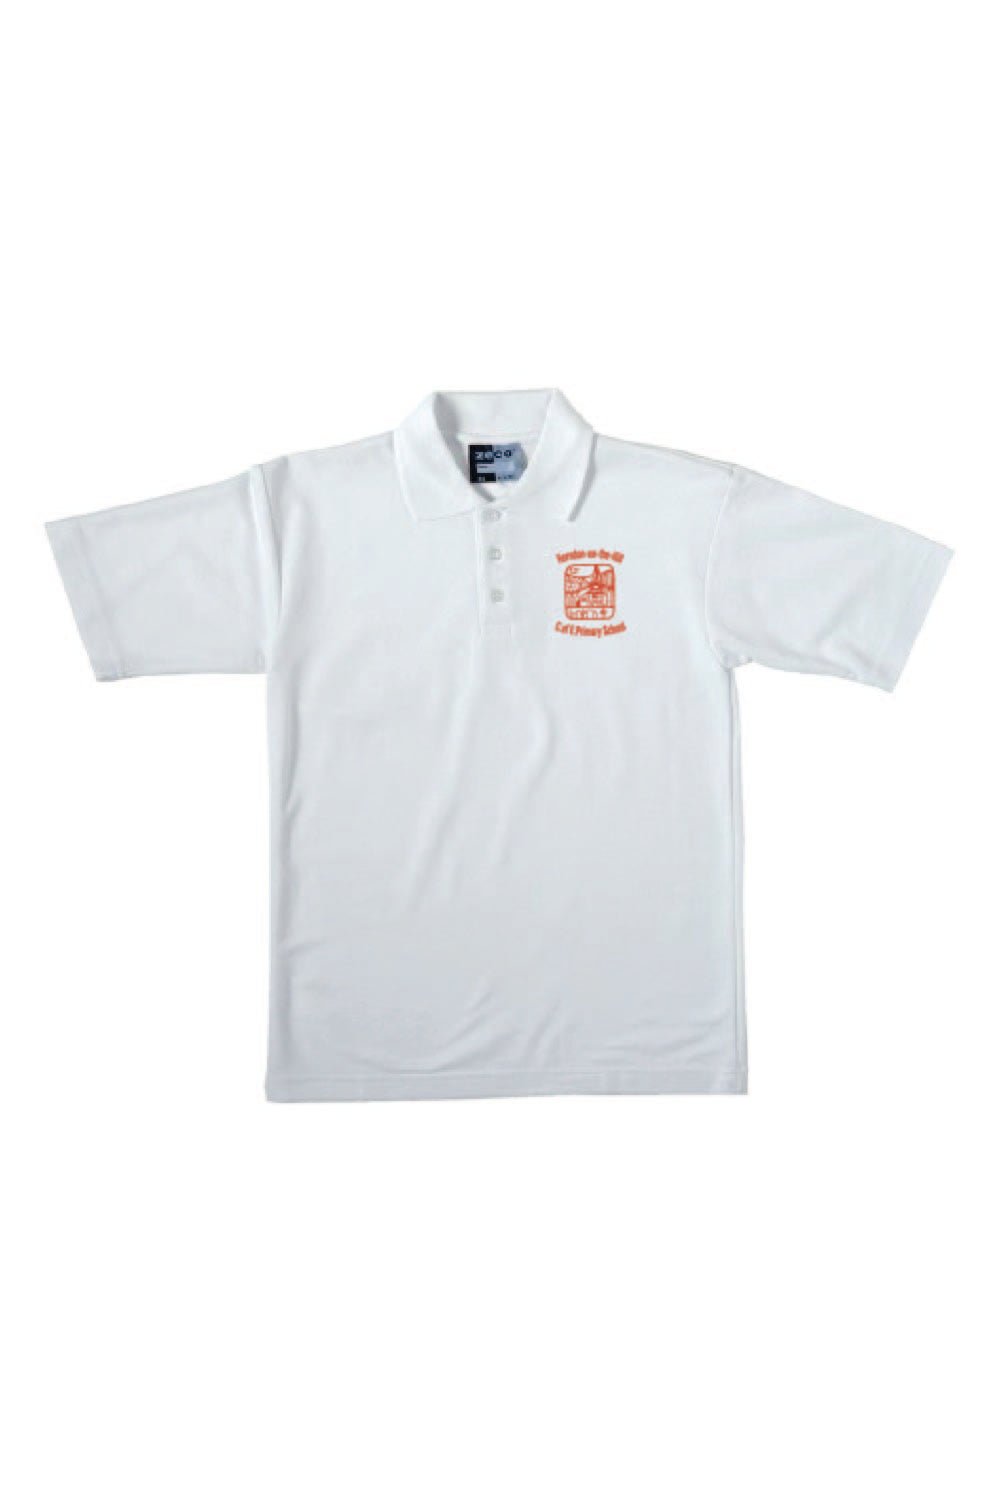 Horndon-on-the-Hill White Polo Shirt - Uniformwise Schoolwear